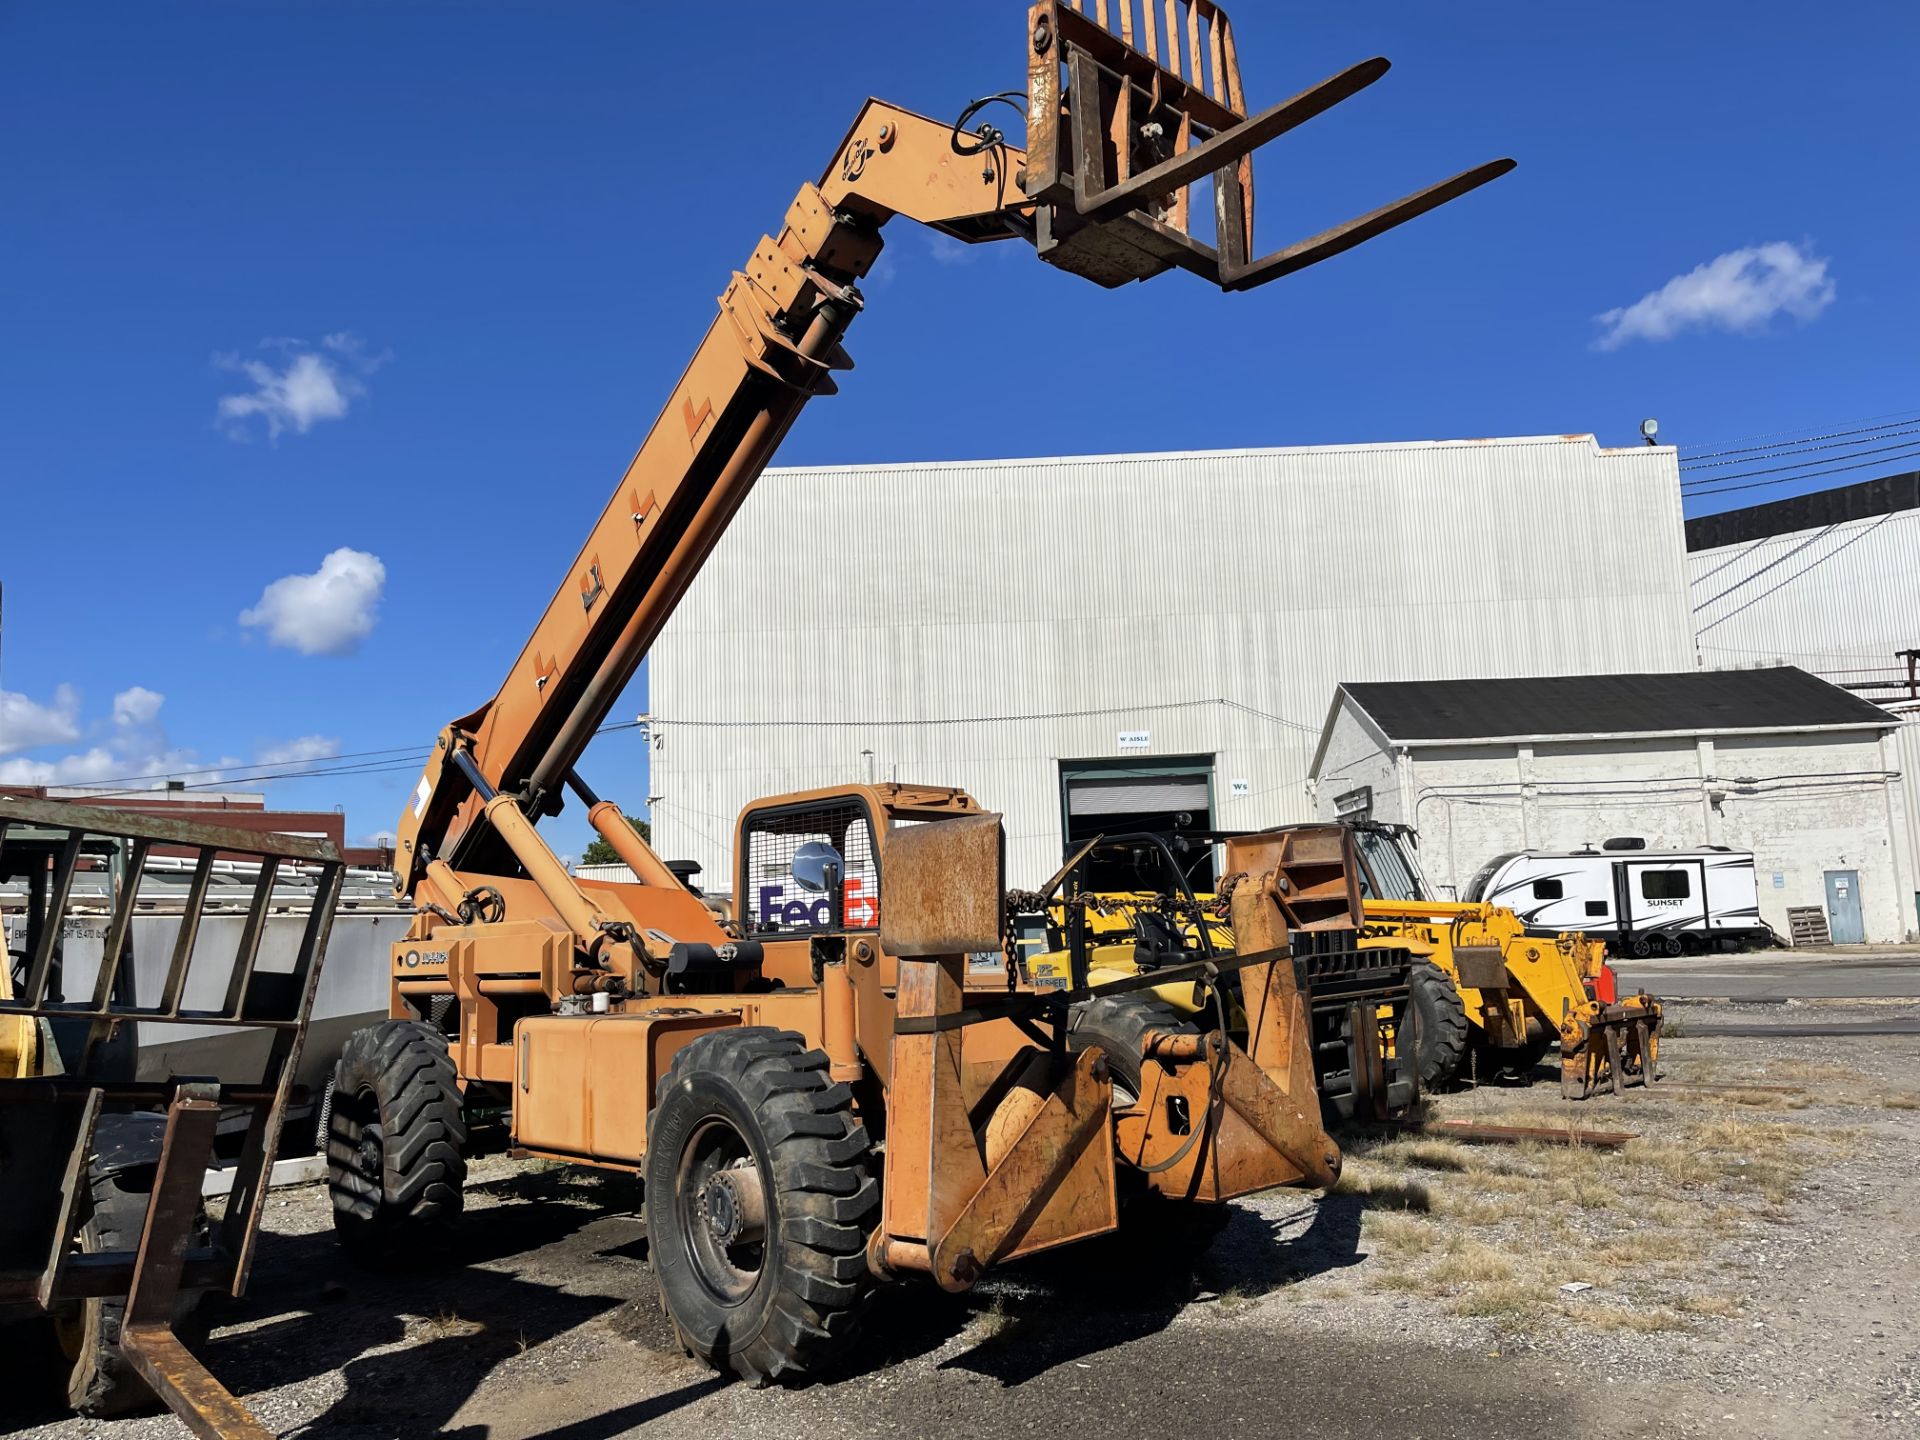 Lull 1044C054 10,000lb Telescopic Forklift - Located in Lester, PA - Image 2 of 7